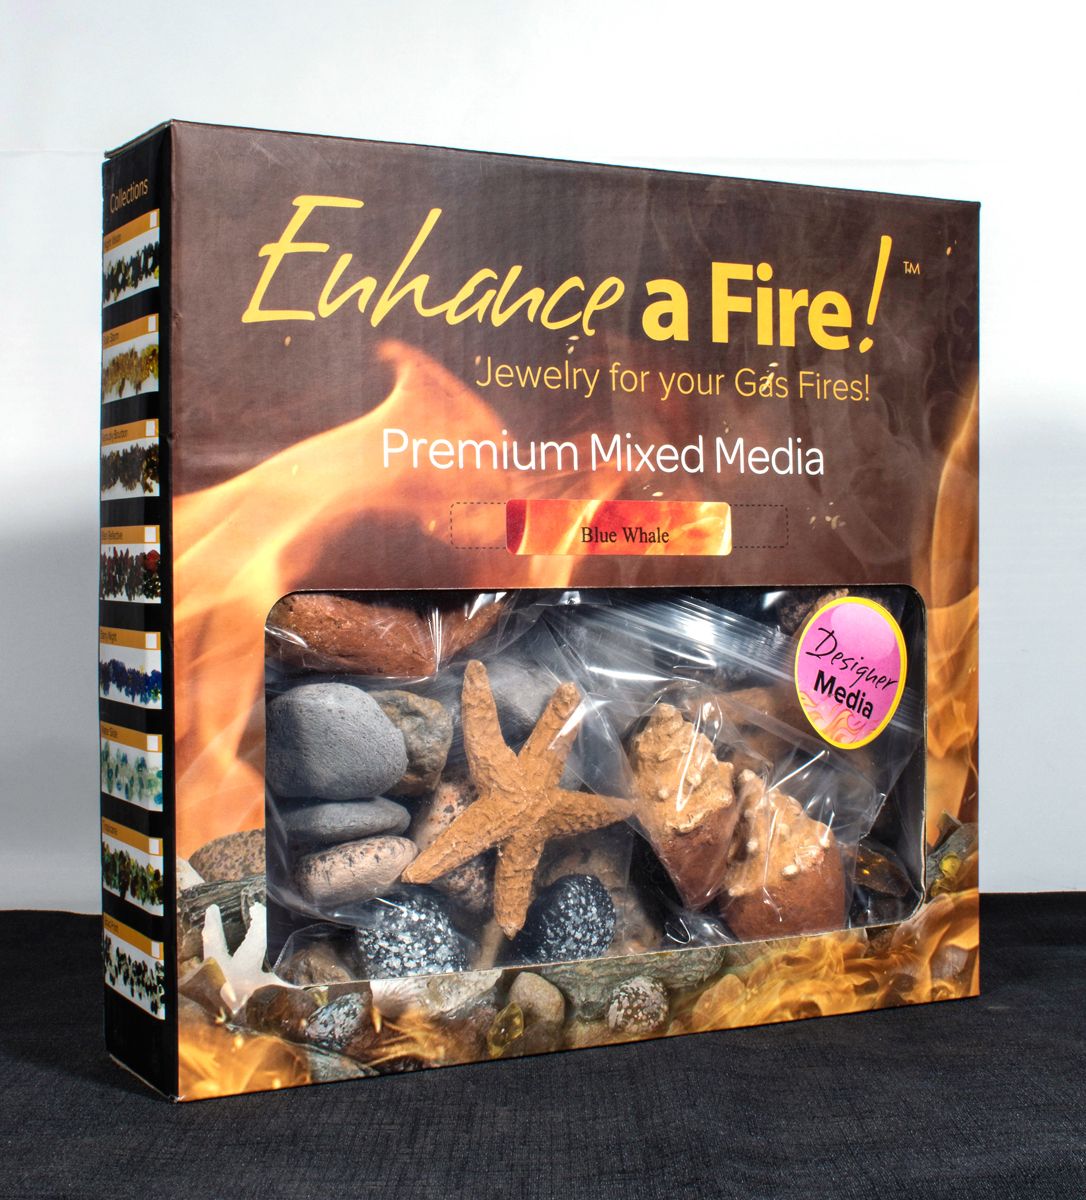 Enhance A Fire 1.78 Lb. Blue Whale Luxury Decorative Mixed Media Set for Gas Fireplace, Log Set and Firepit